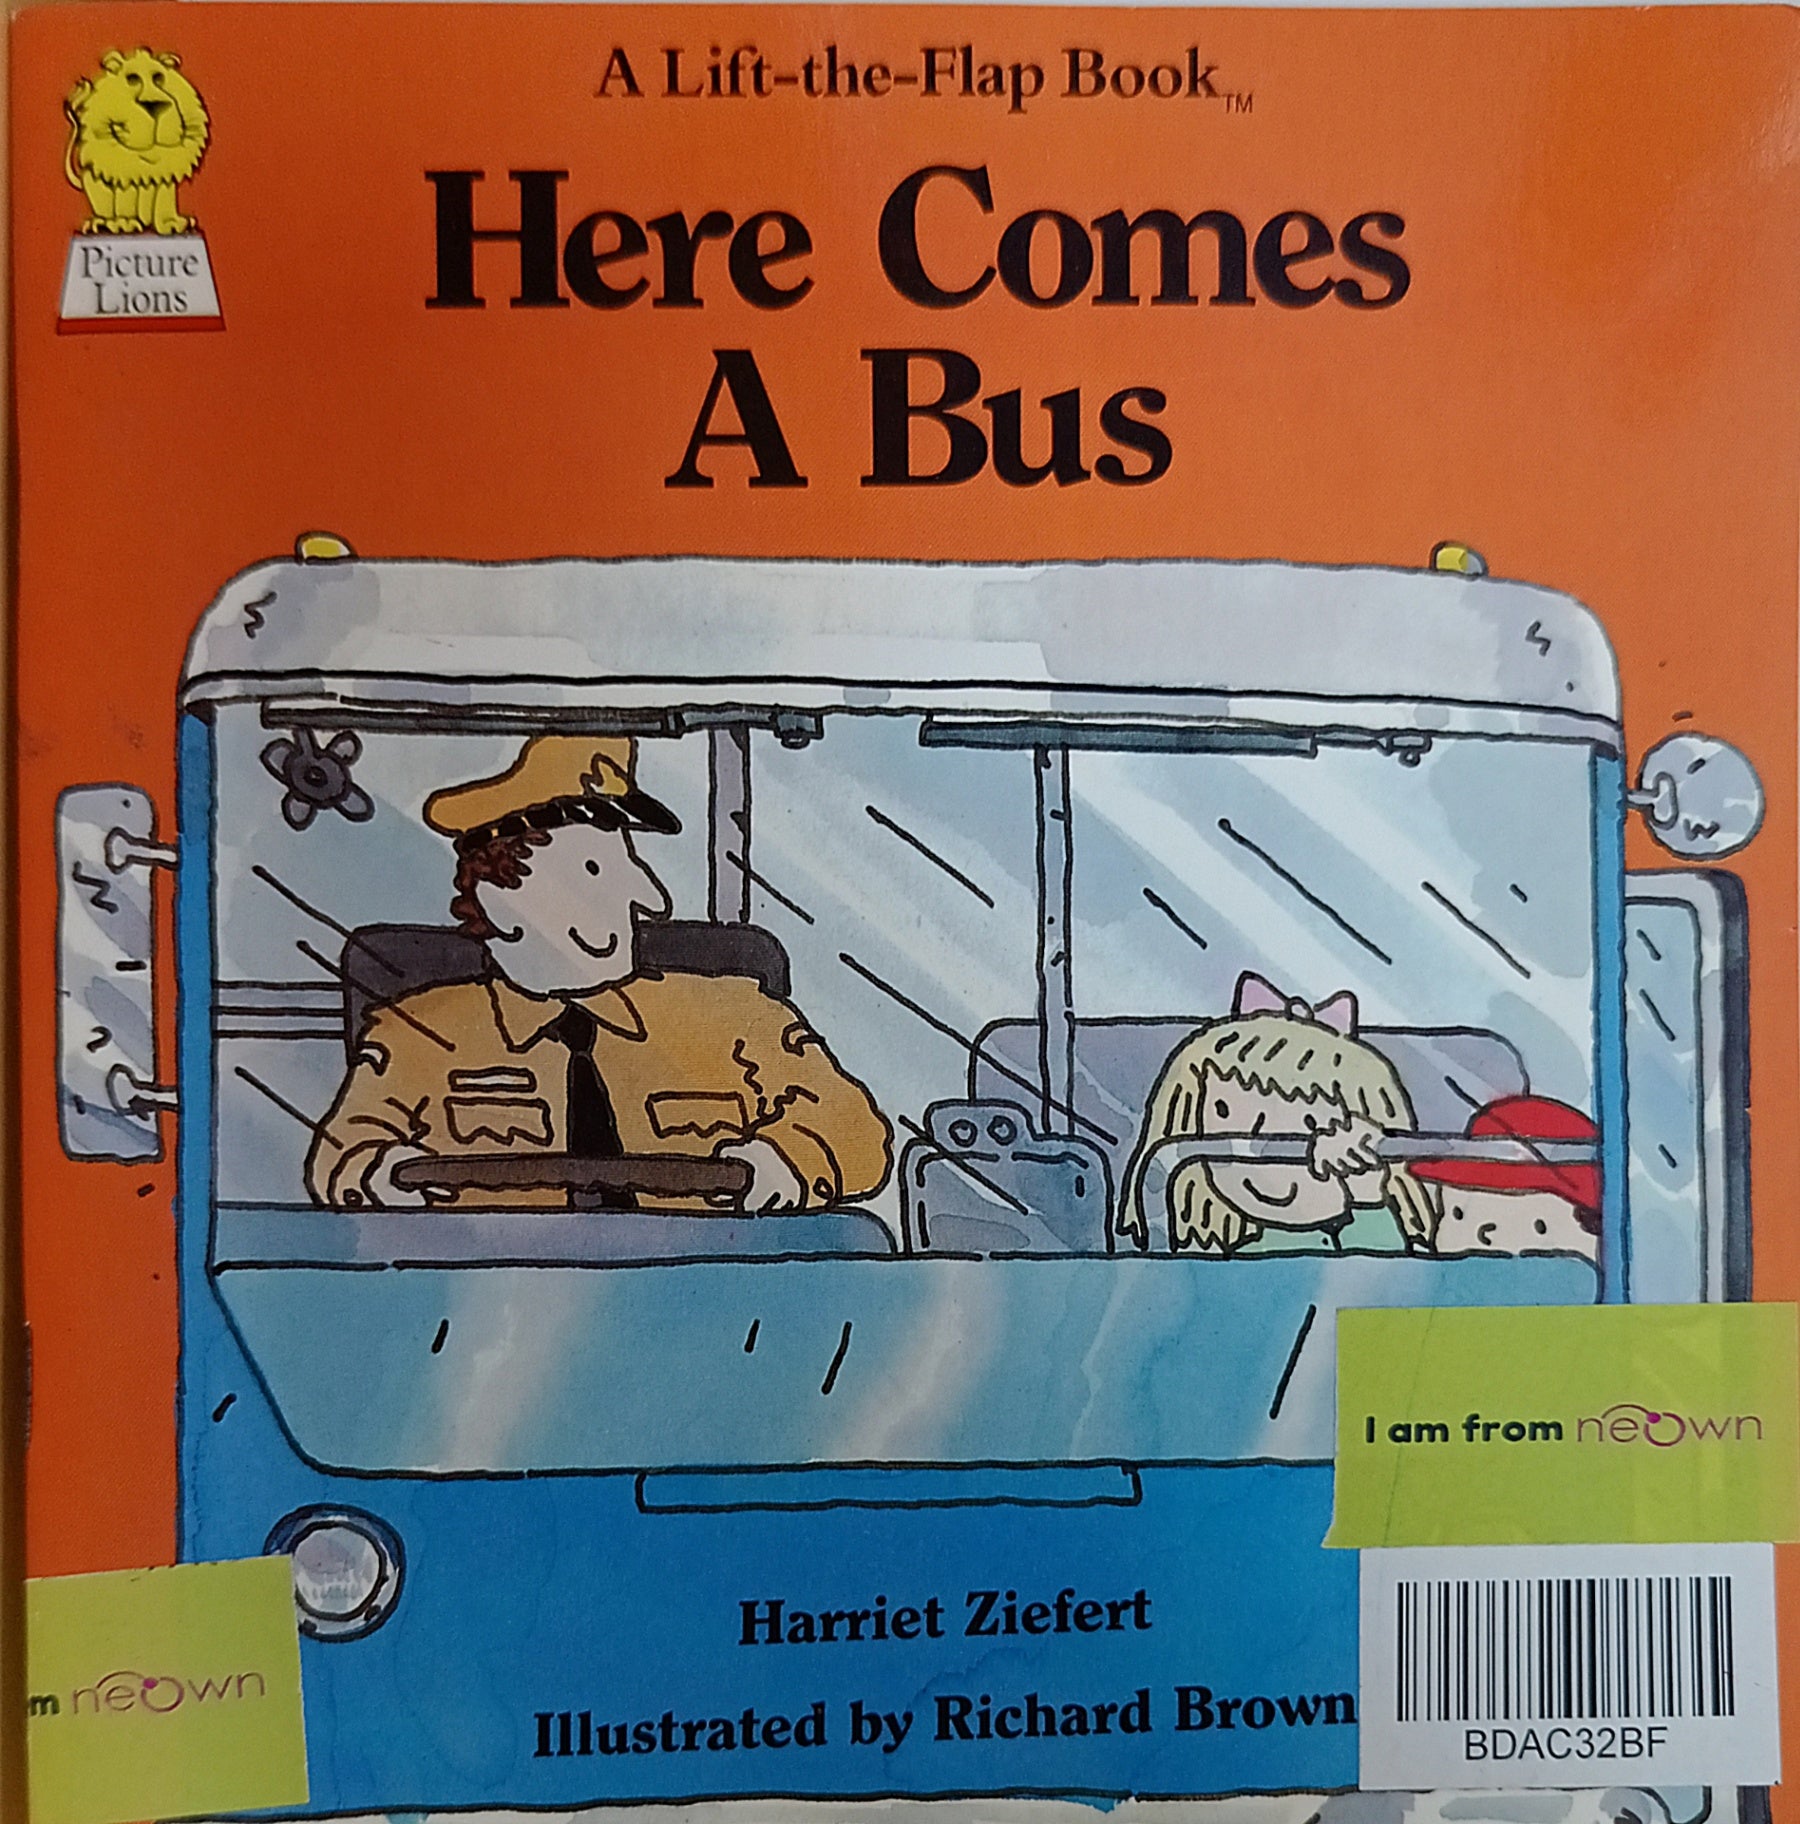 Here Comes A Bus: A Lift-the-Flap Book